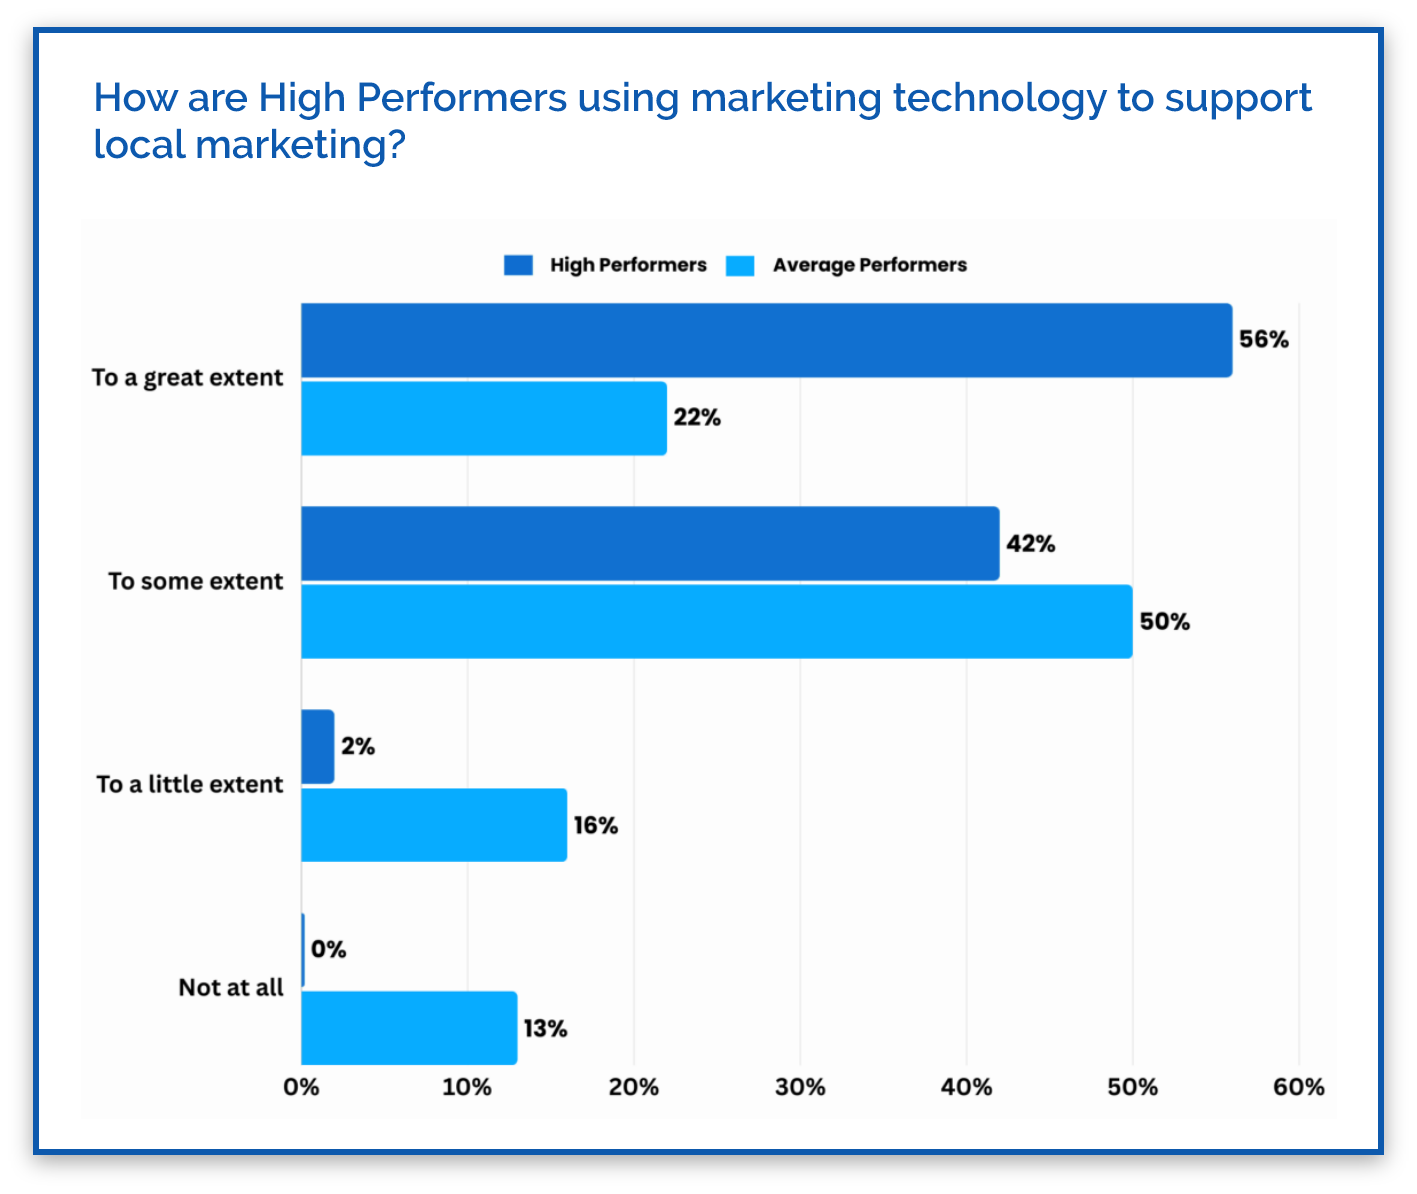 How are brands using marketing tech to support local marketing